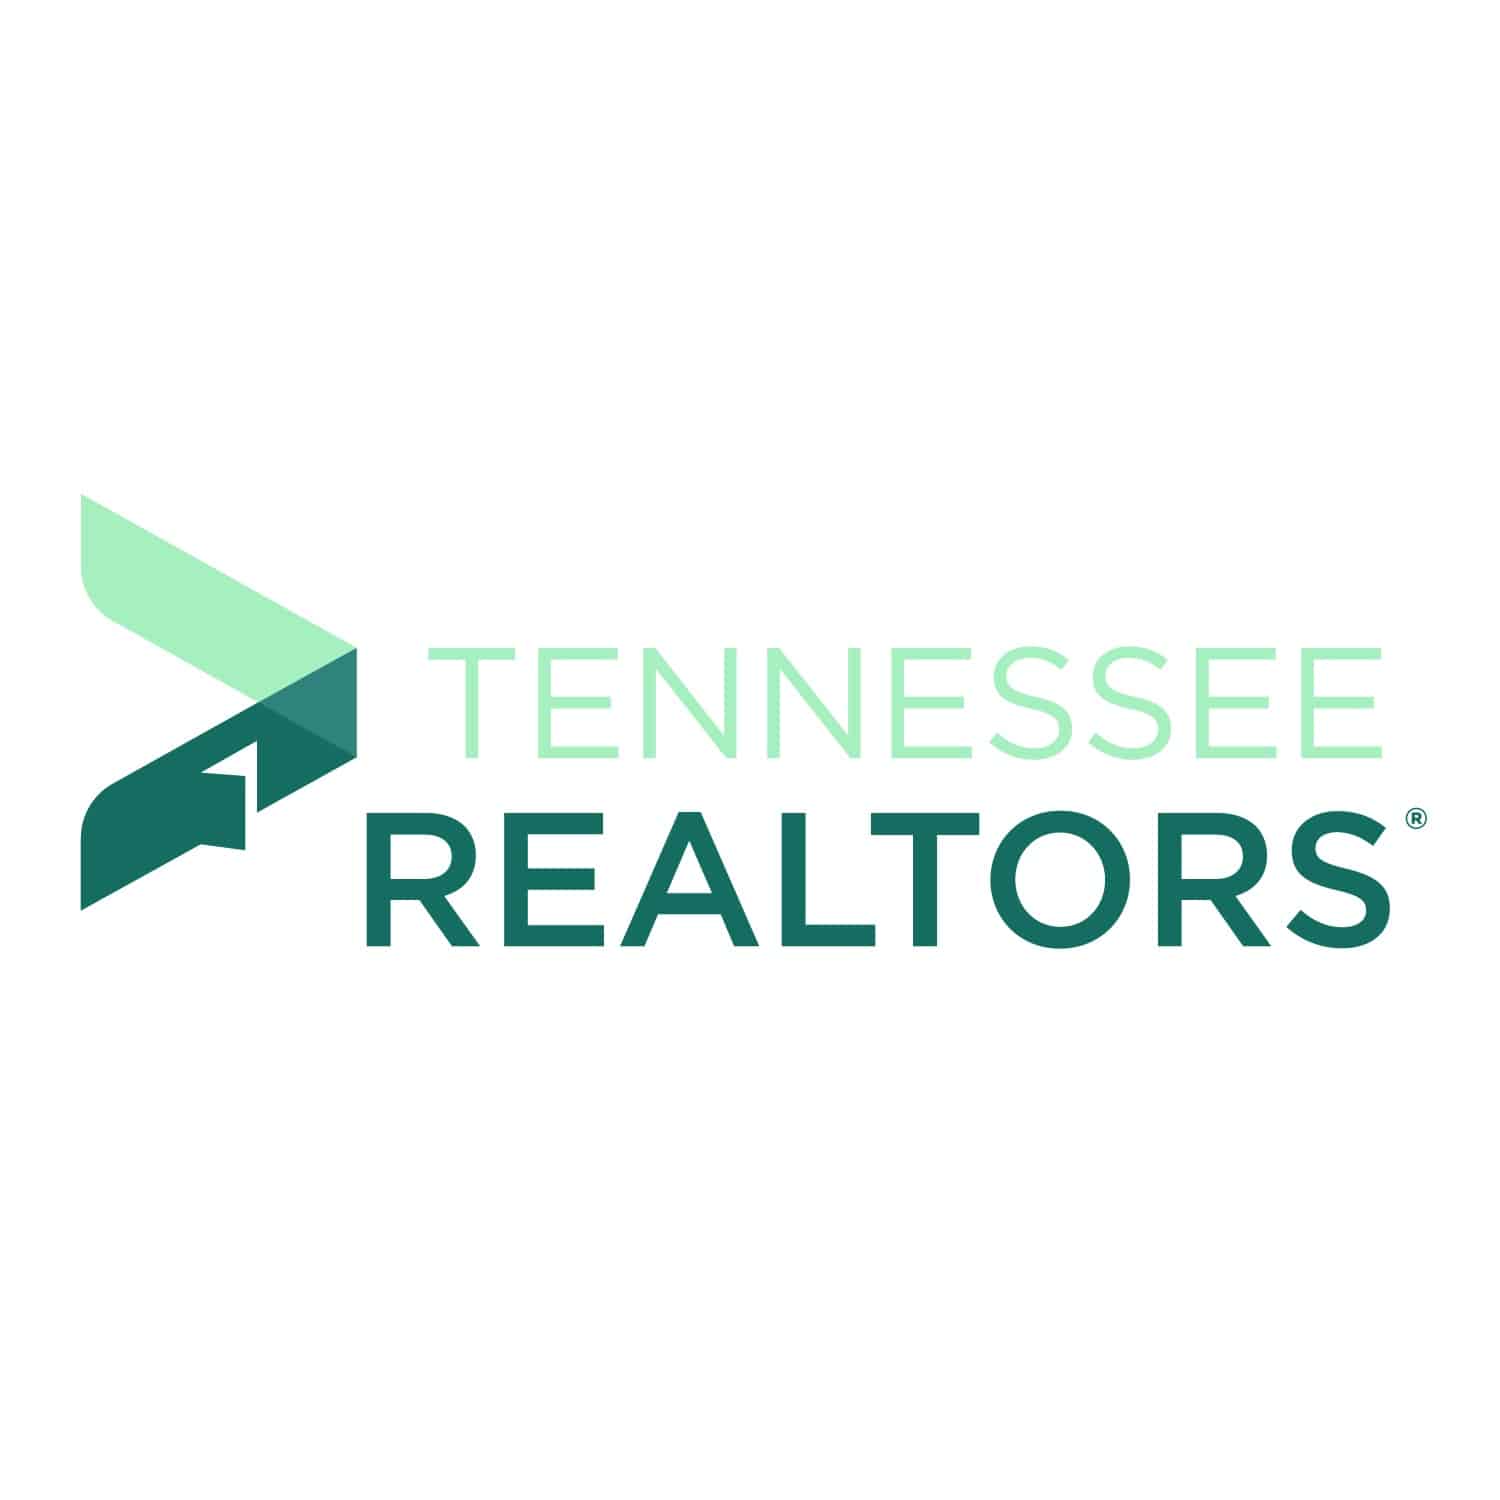 TENNESSEE REALTORS in dark and light teal on a white background with a vertical V at a side in the same colors.